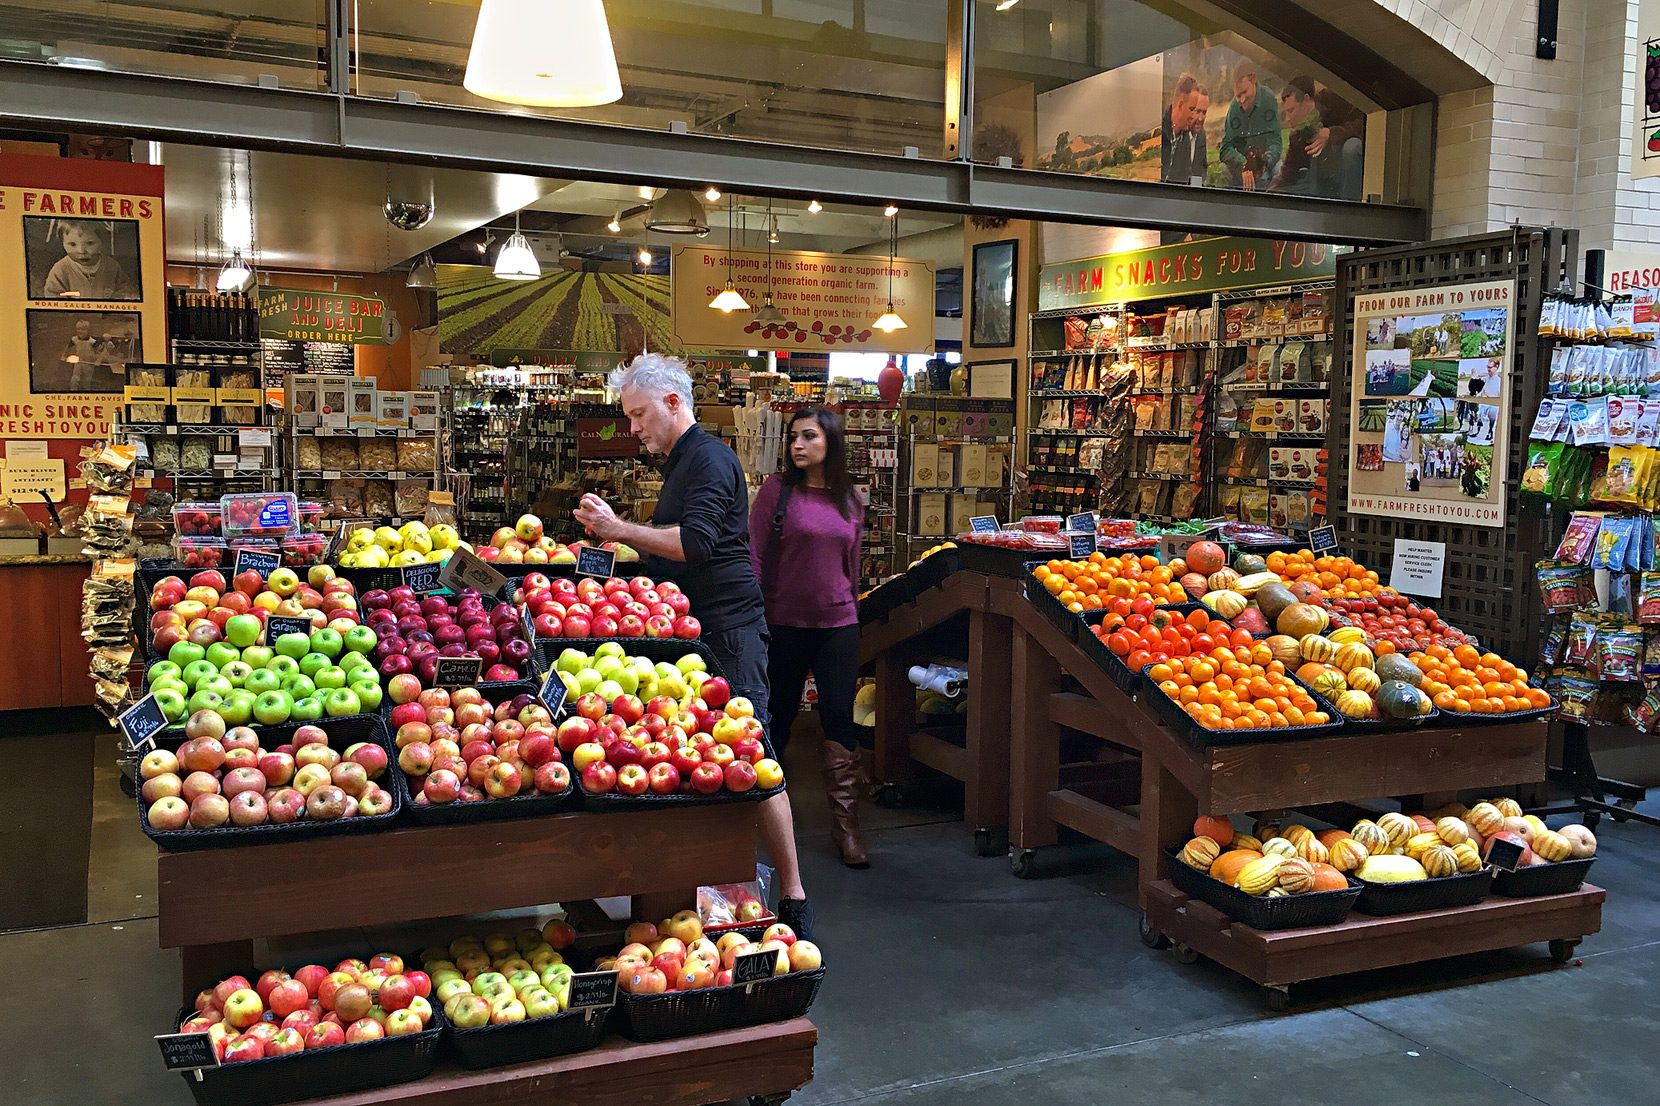 Farm-Fresh-to-You-grocery-store-at-Ferry-Building-Marketplace-San-Francisco